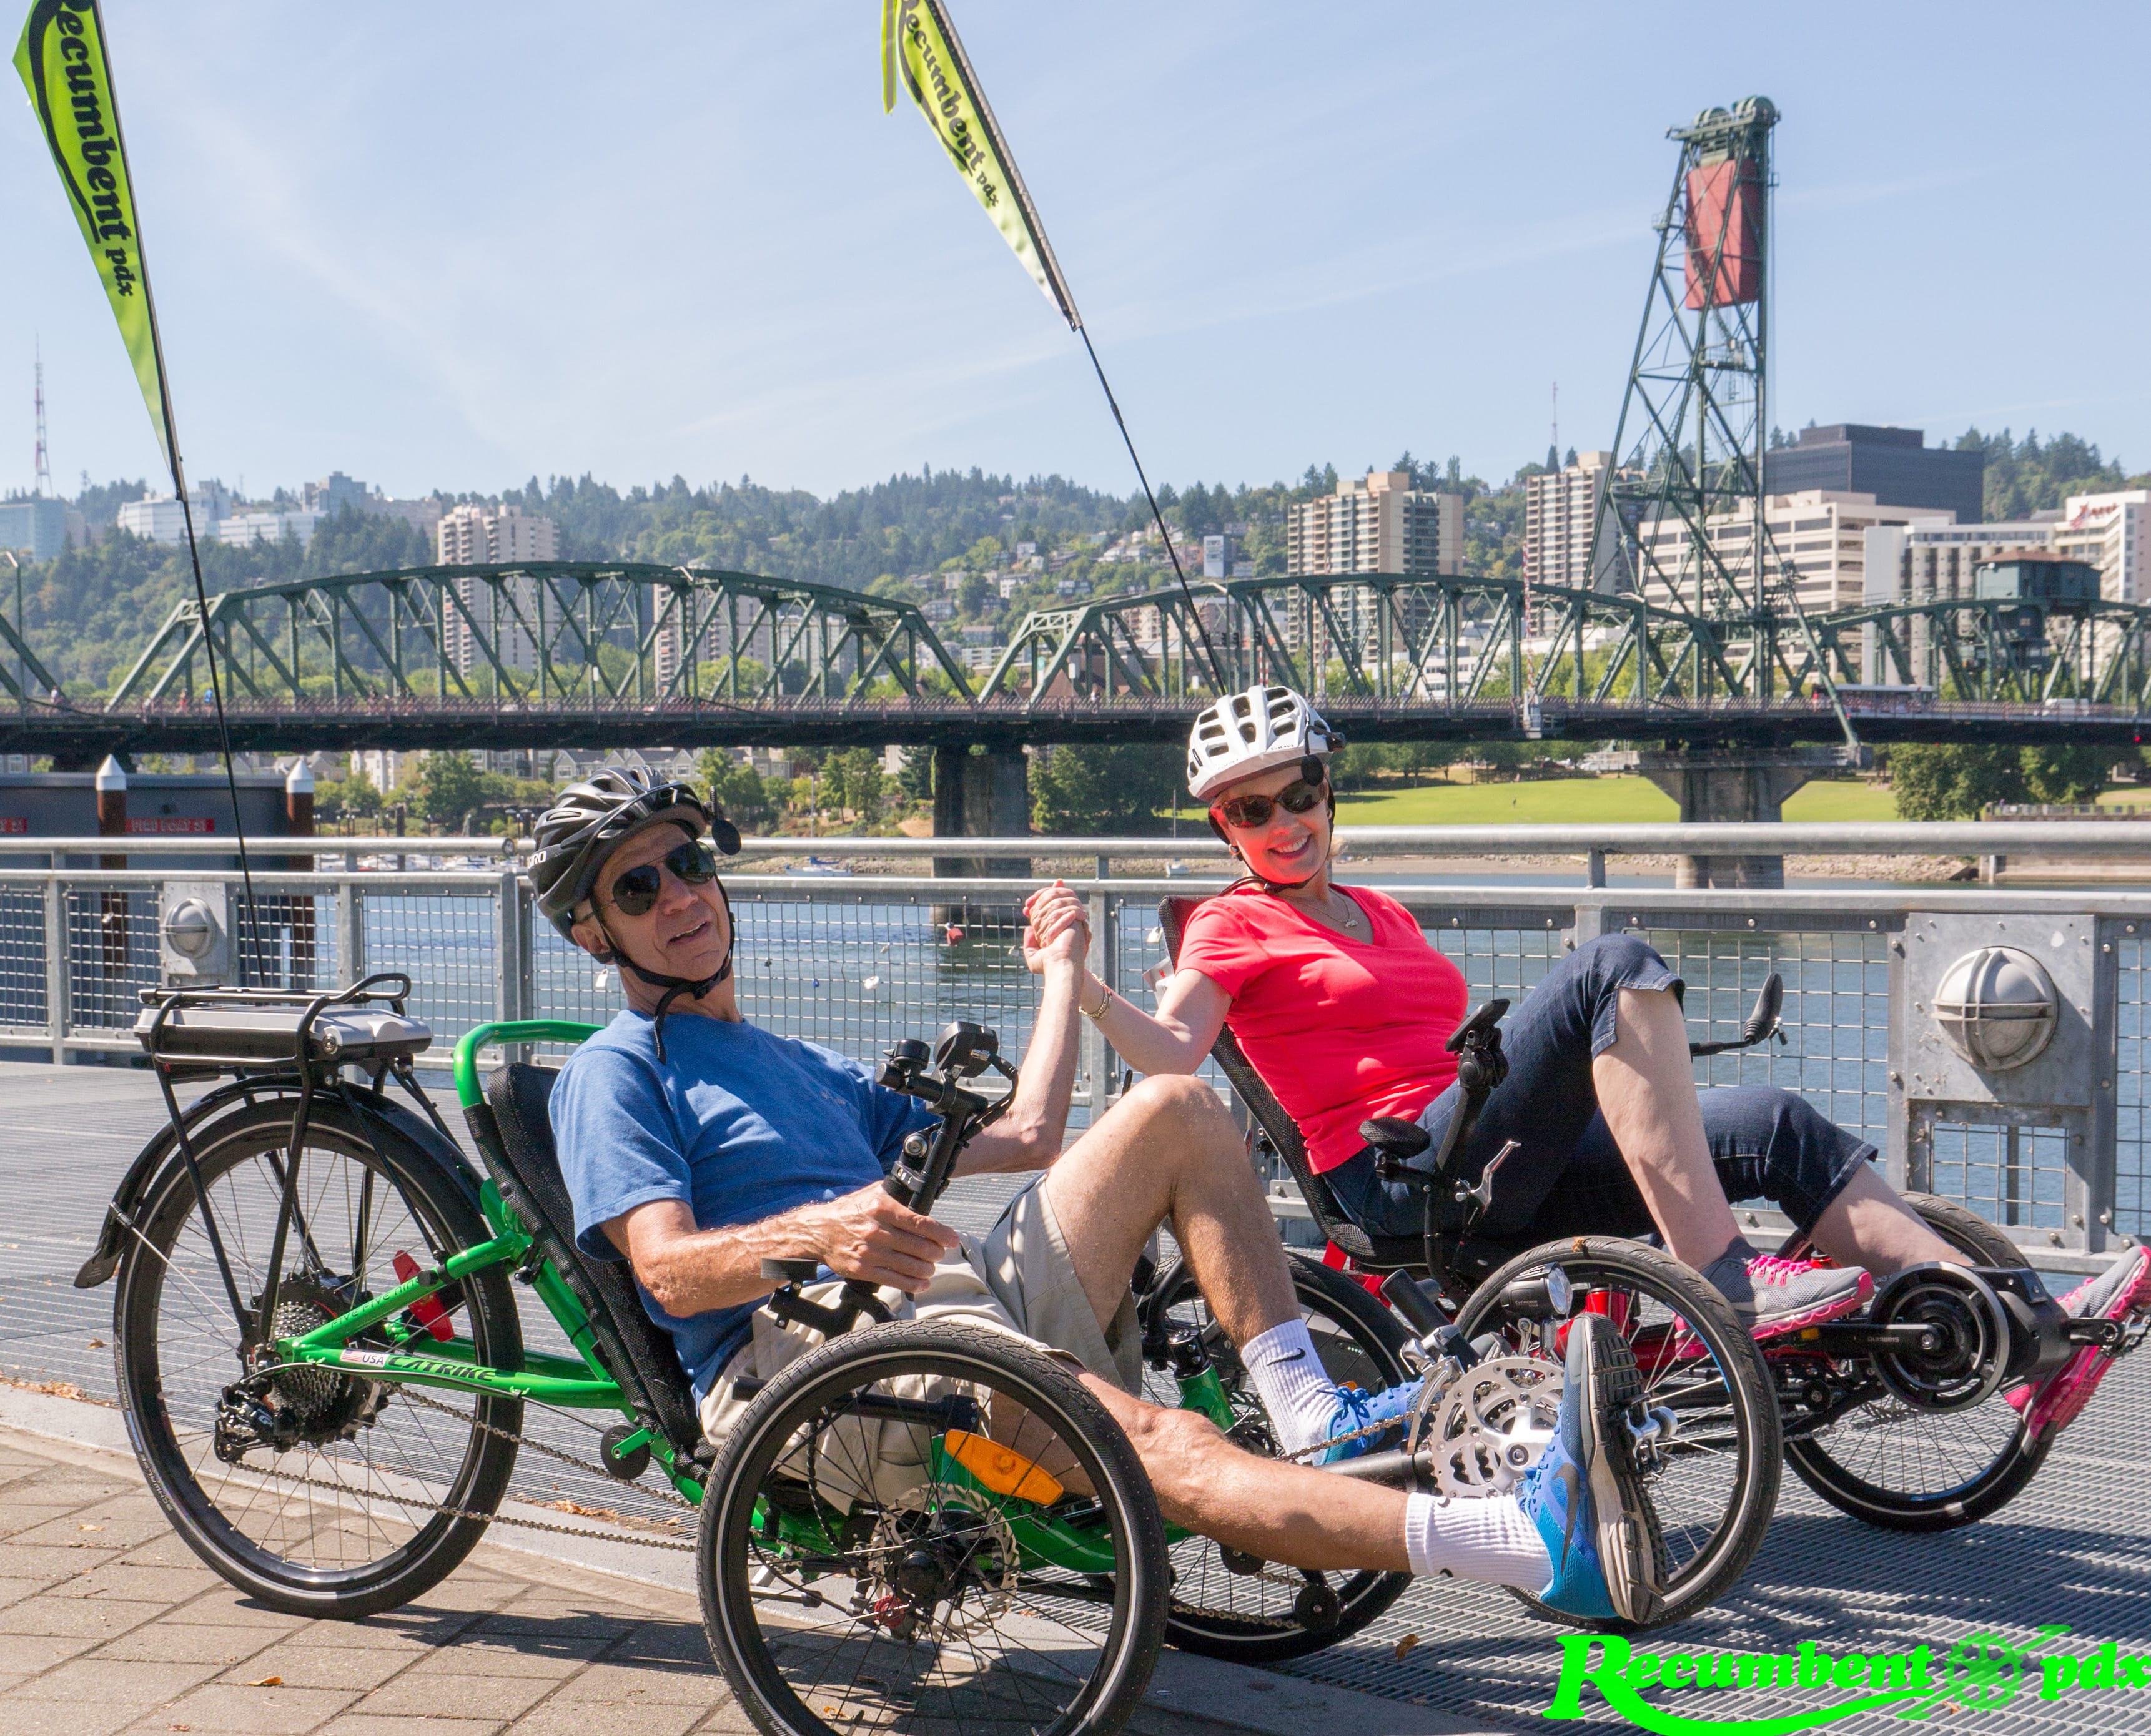 Recumbent Trikes offer a wonderful way to enjoy the Portland Waterfront at any age